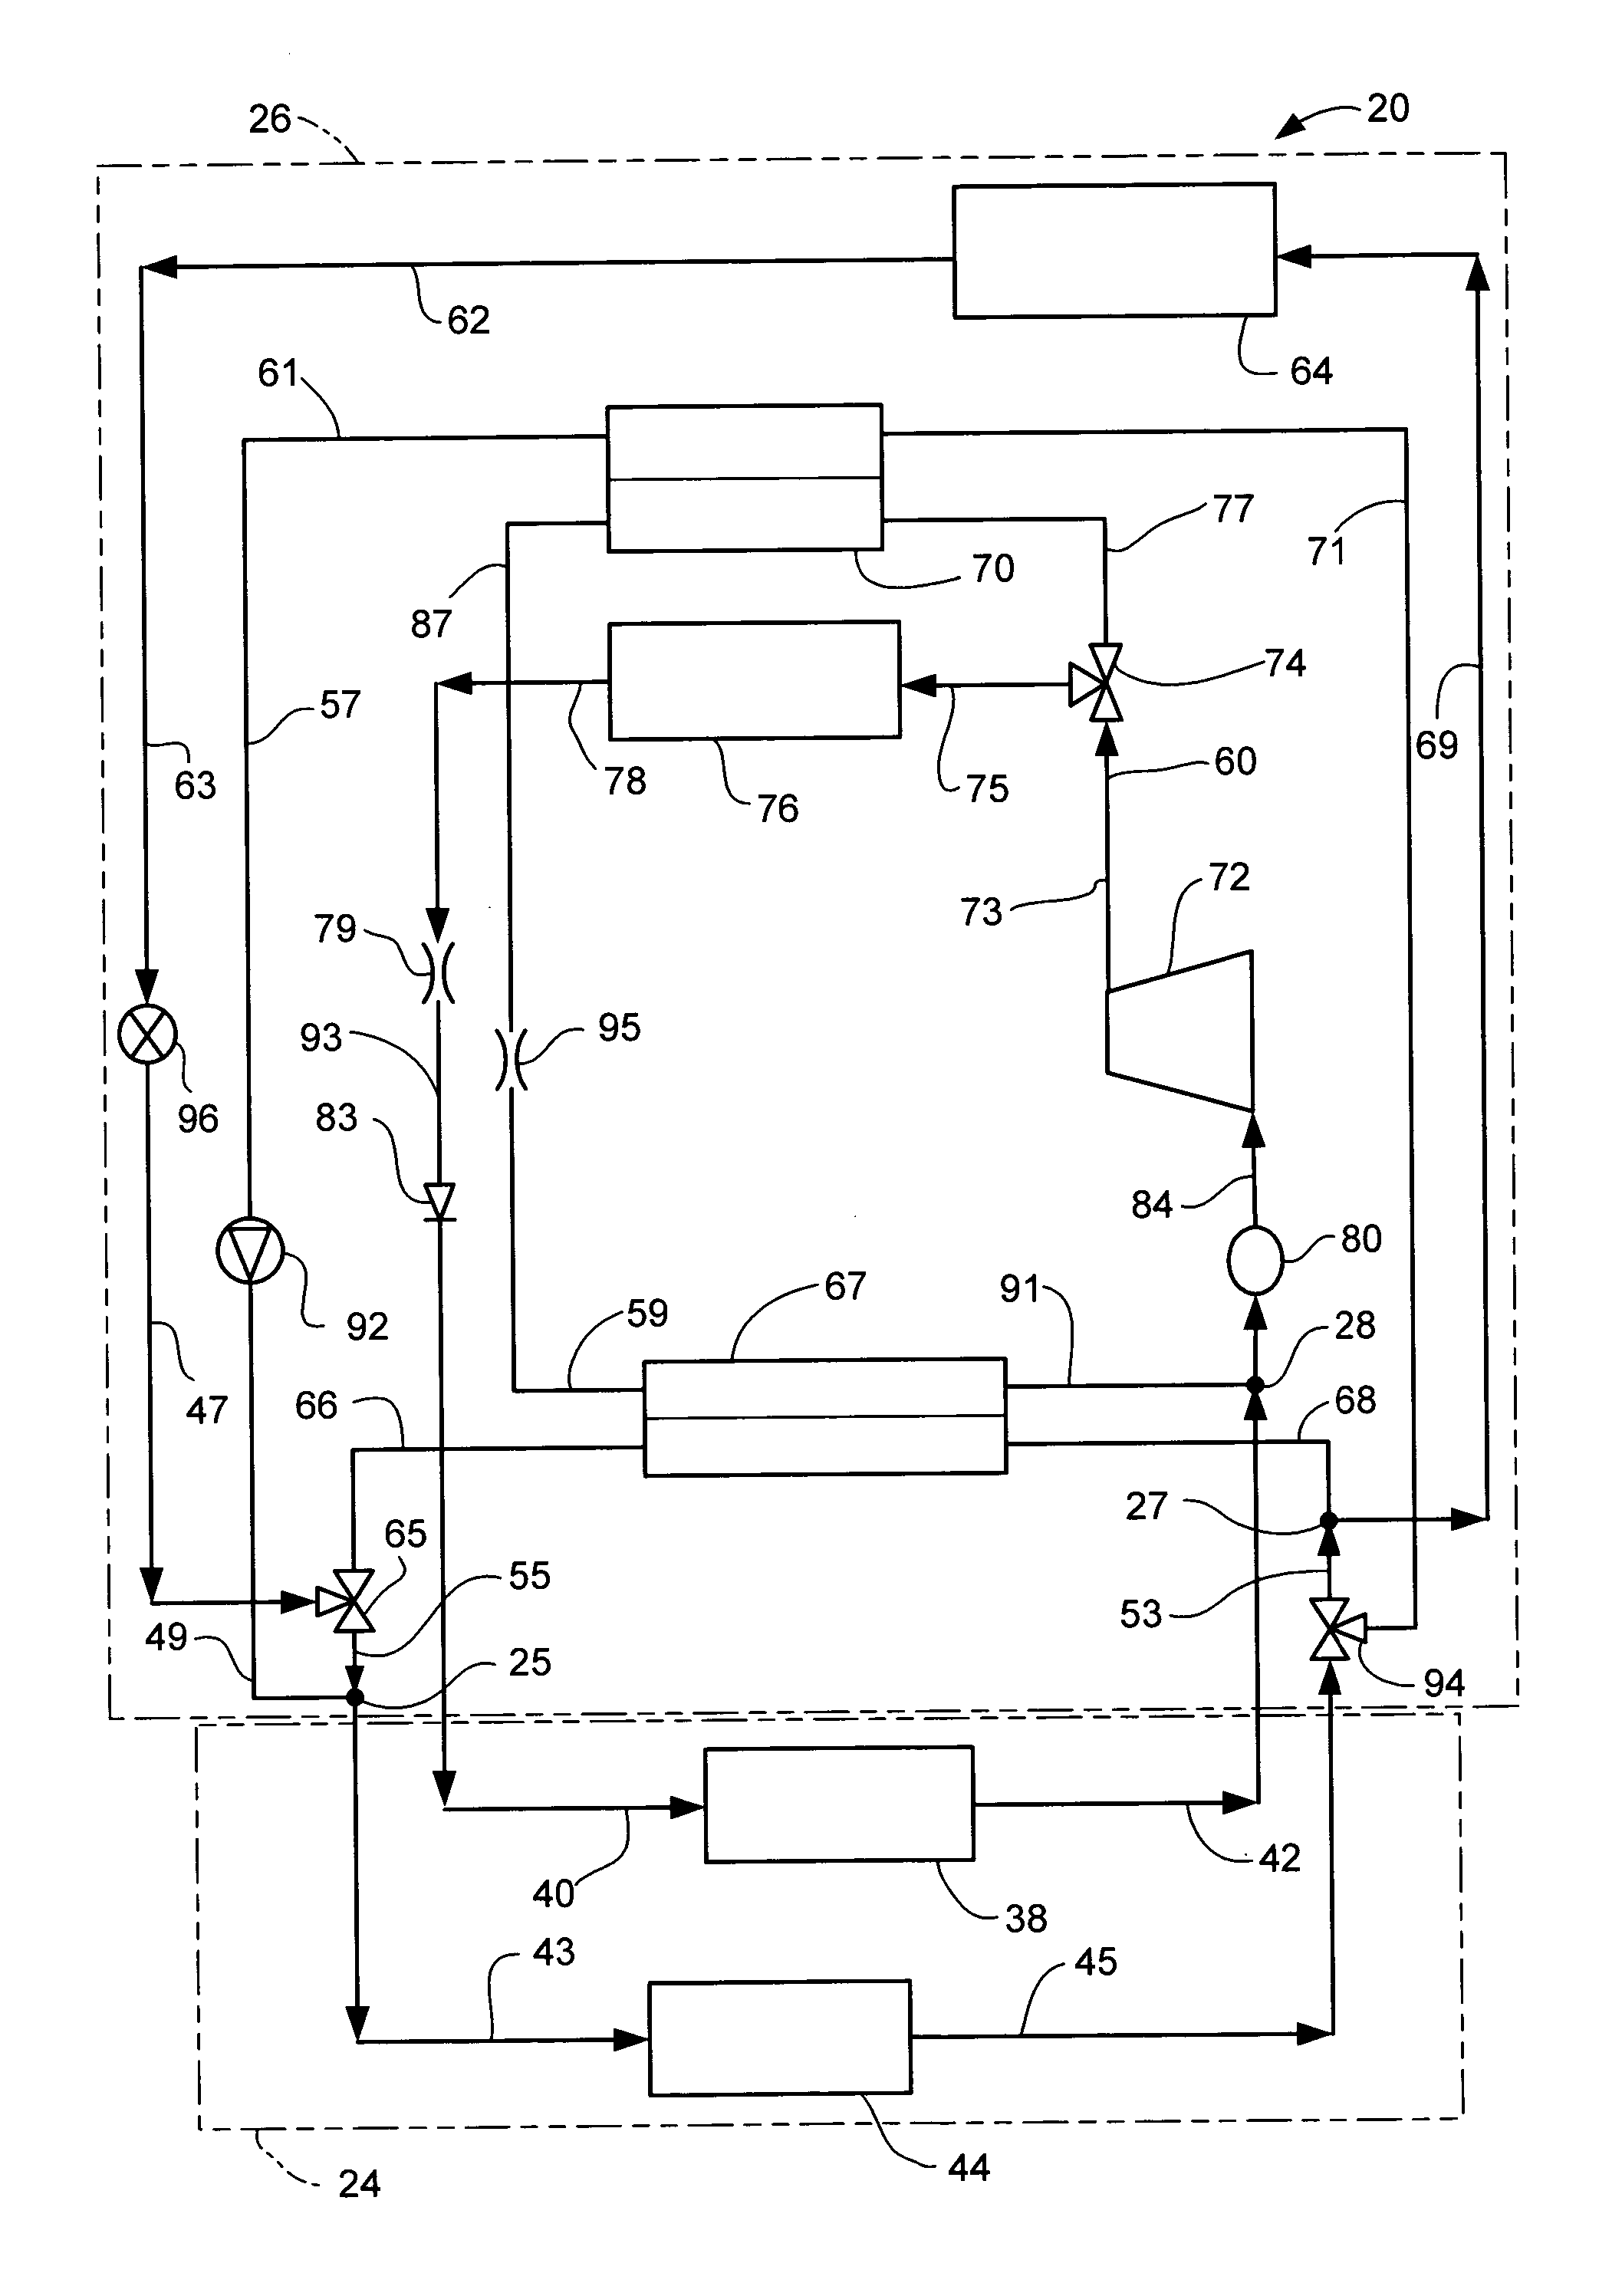 Heat pump and air conditioning systemn for a vehicle